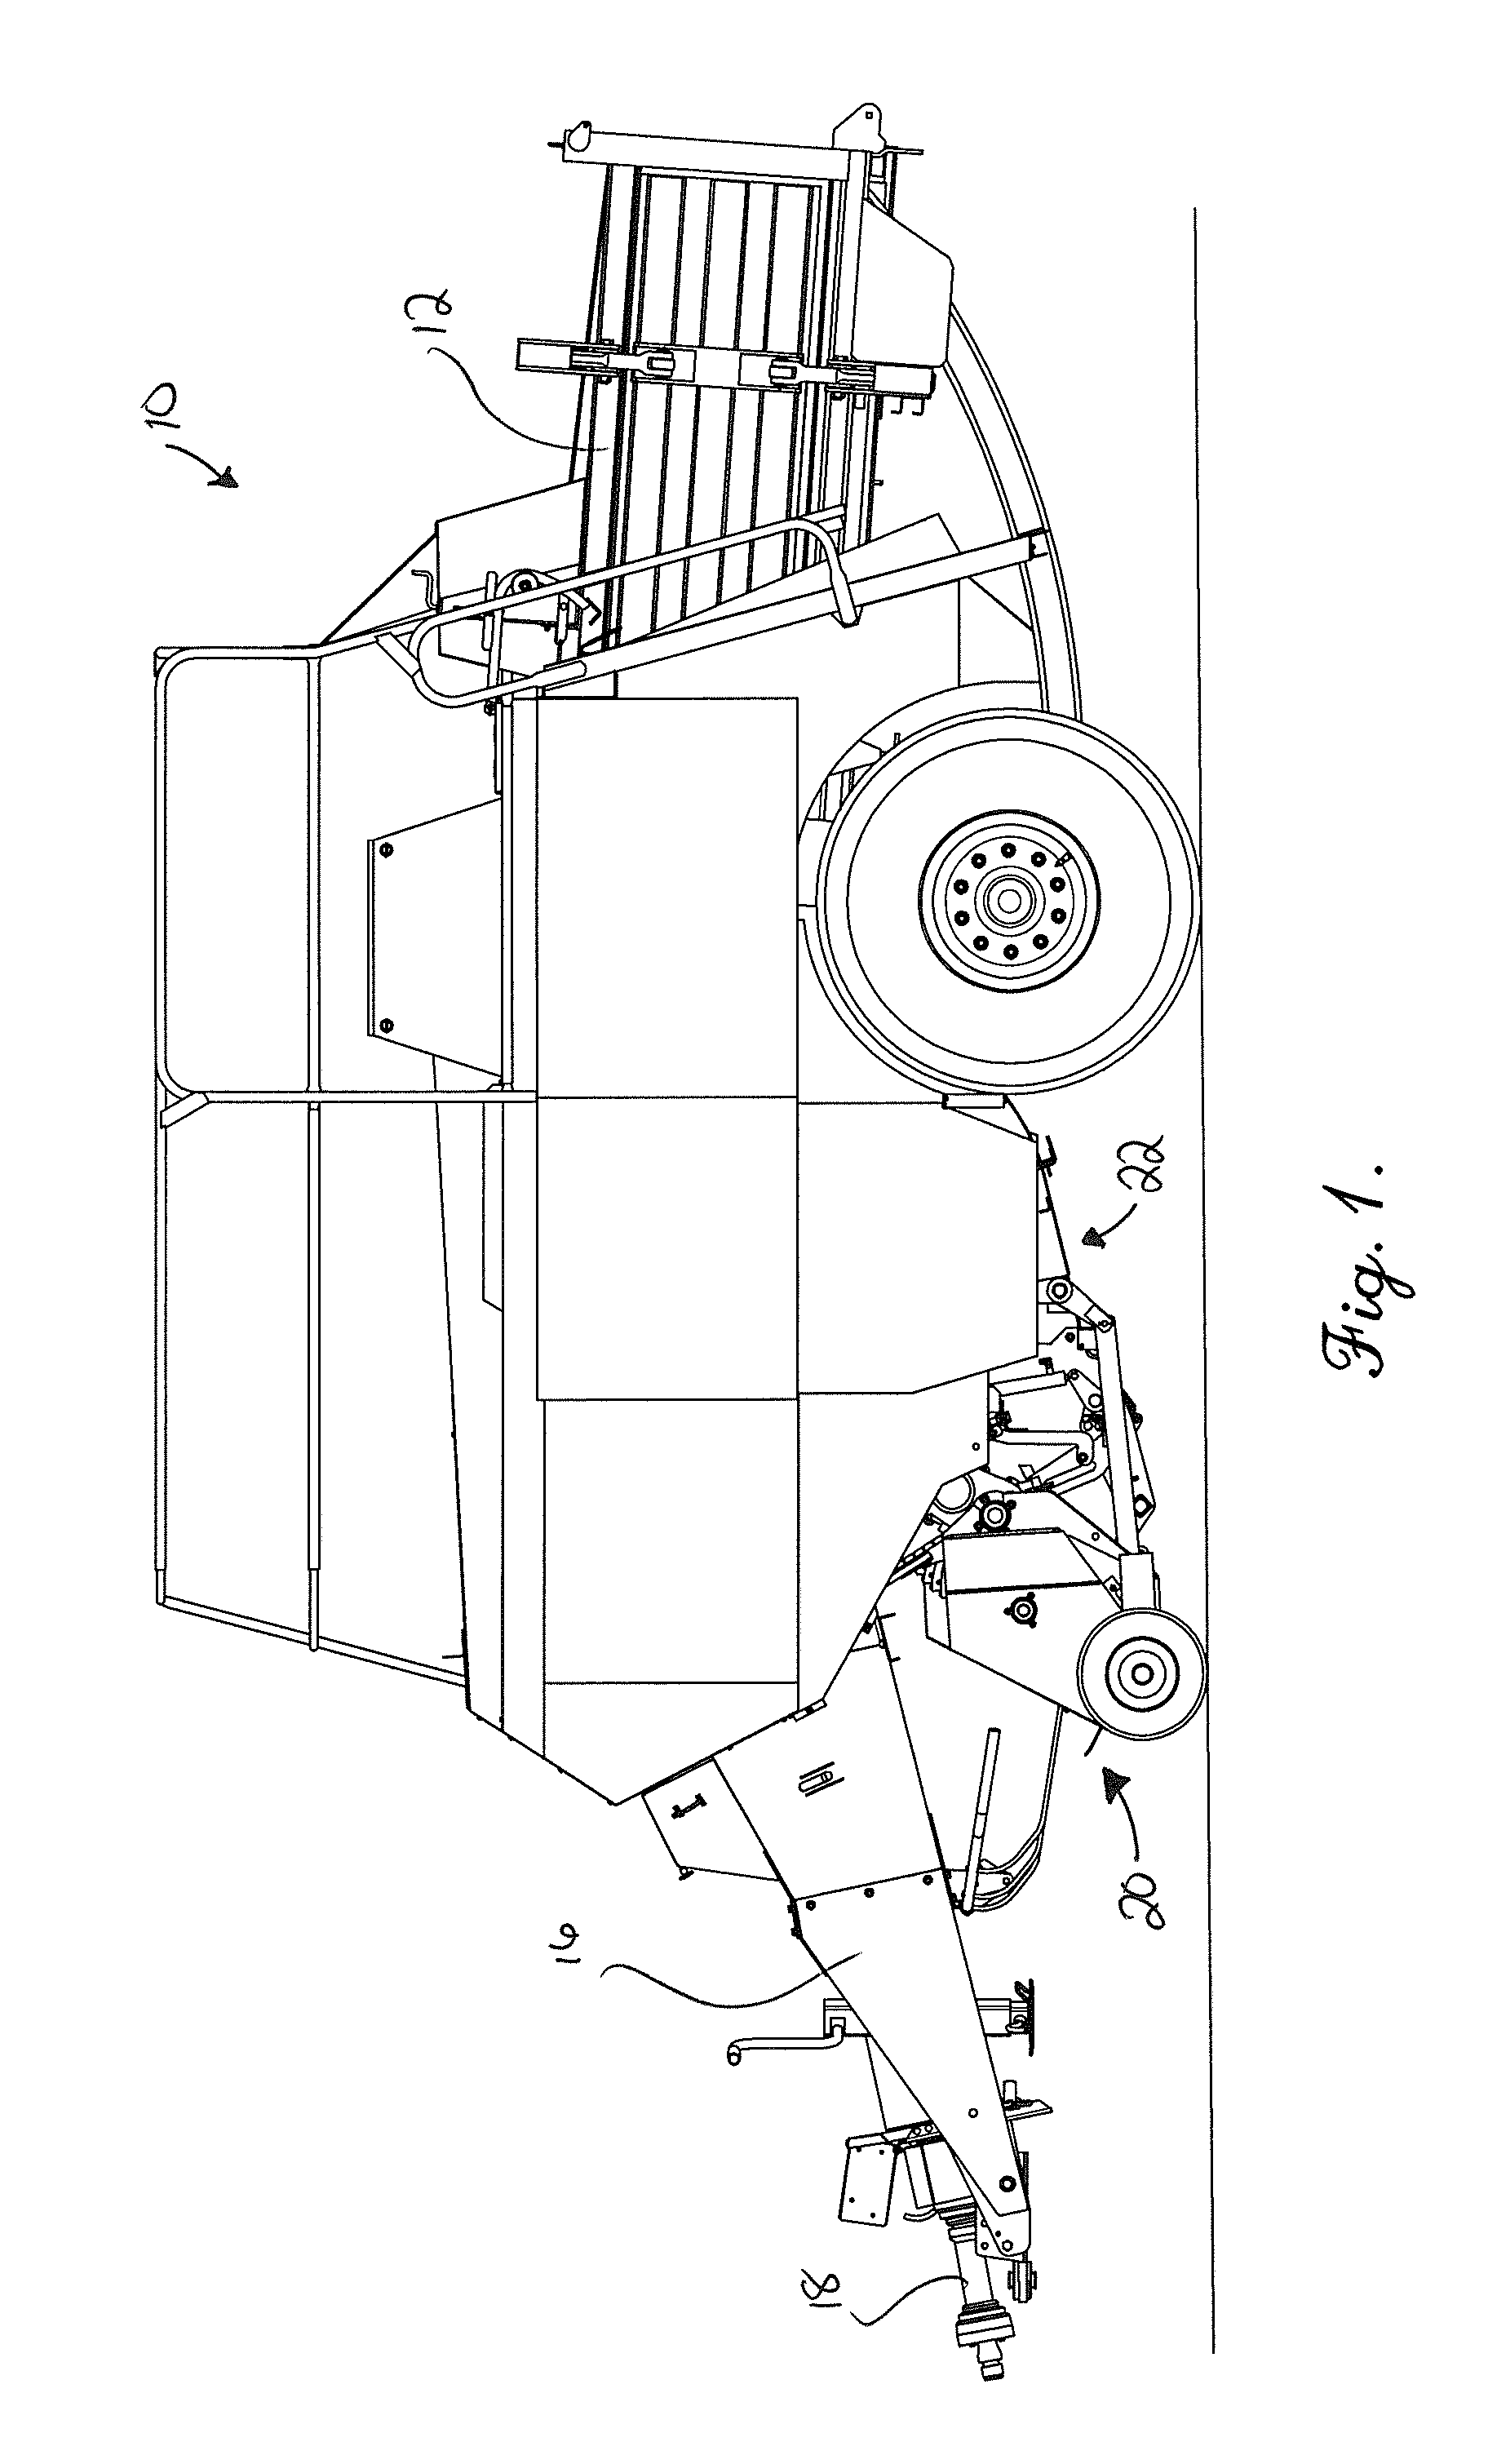 Agricultural implement having knife load responsive infeed cutter